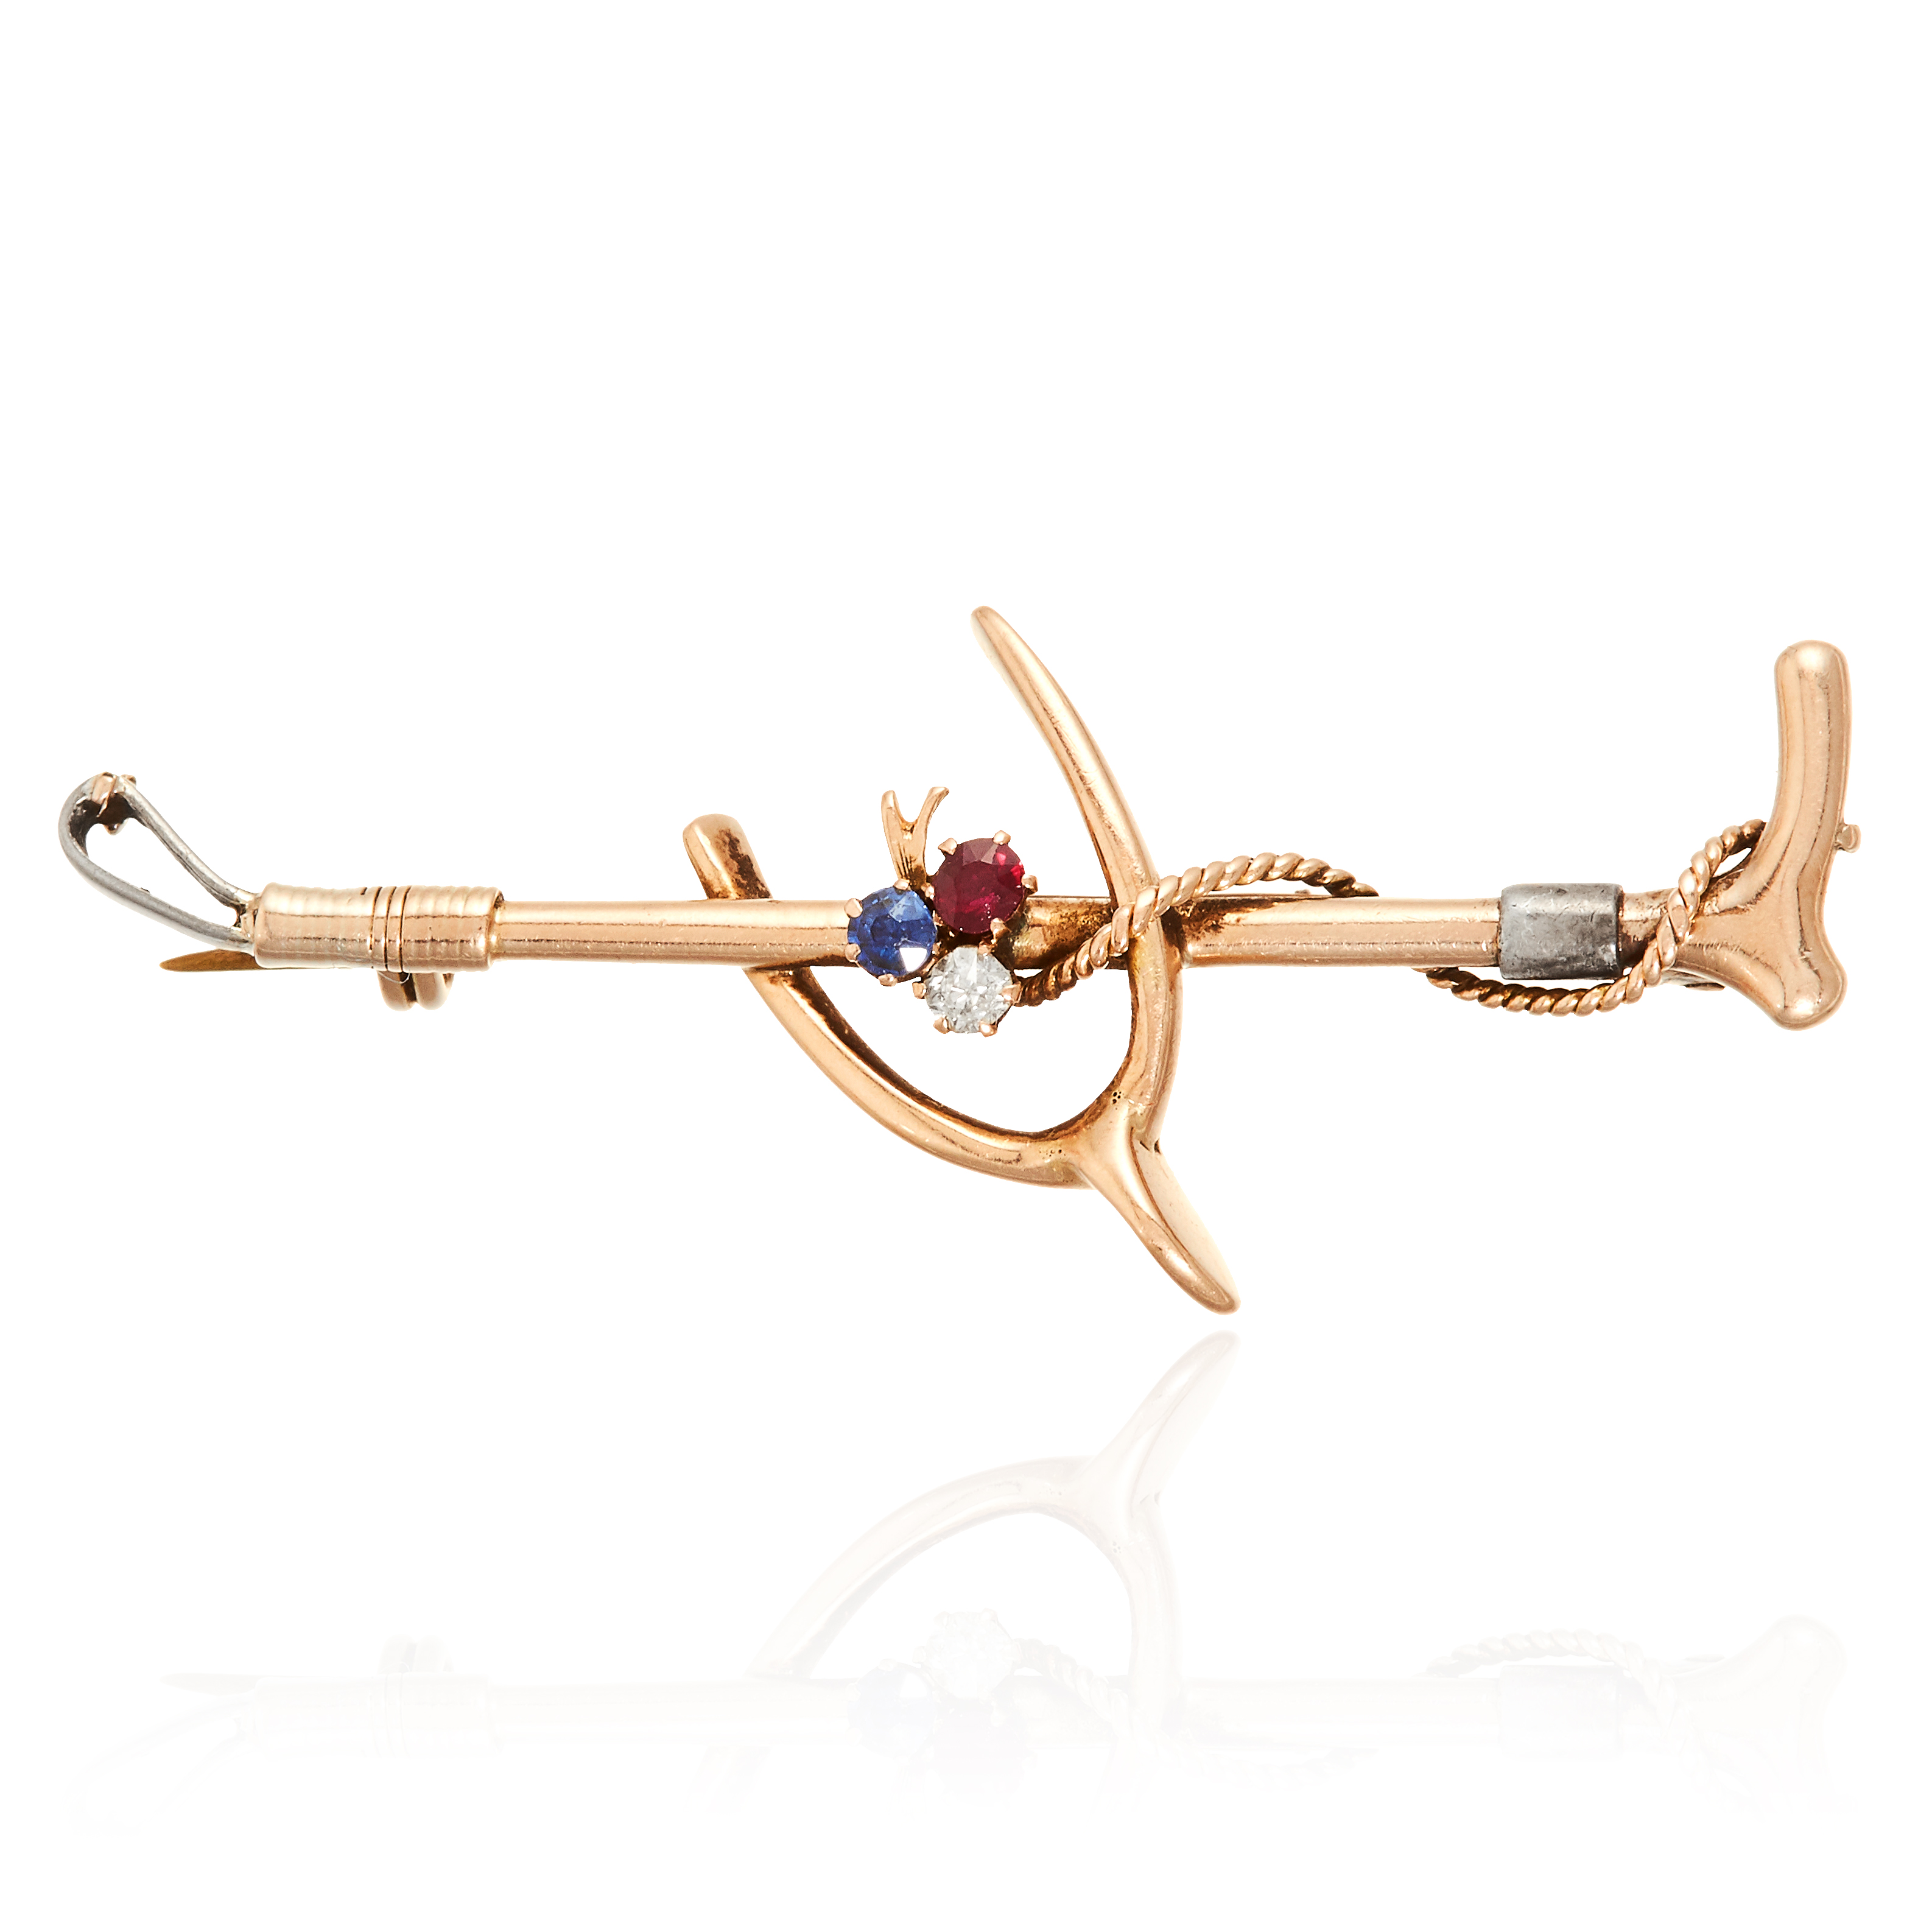 A RUBY, SAPPHIRE AND DIAMOND SPUR AND WHIP NOVELTY BROOCH in yellow gold, designed as spur and whip,